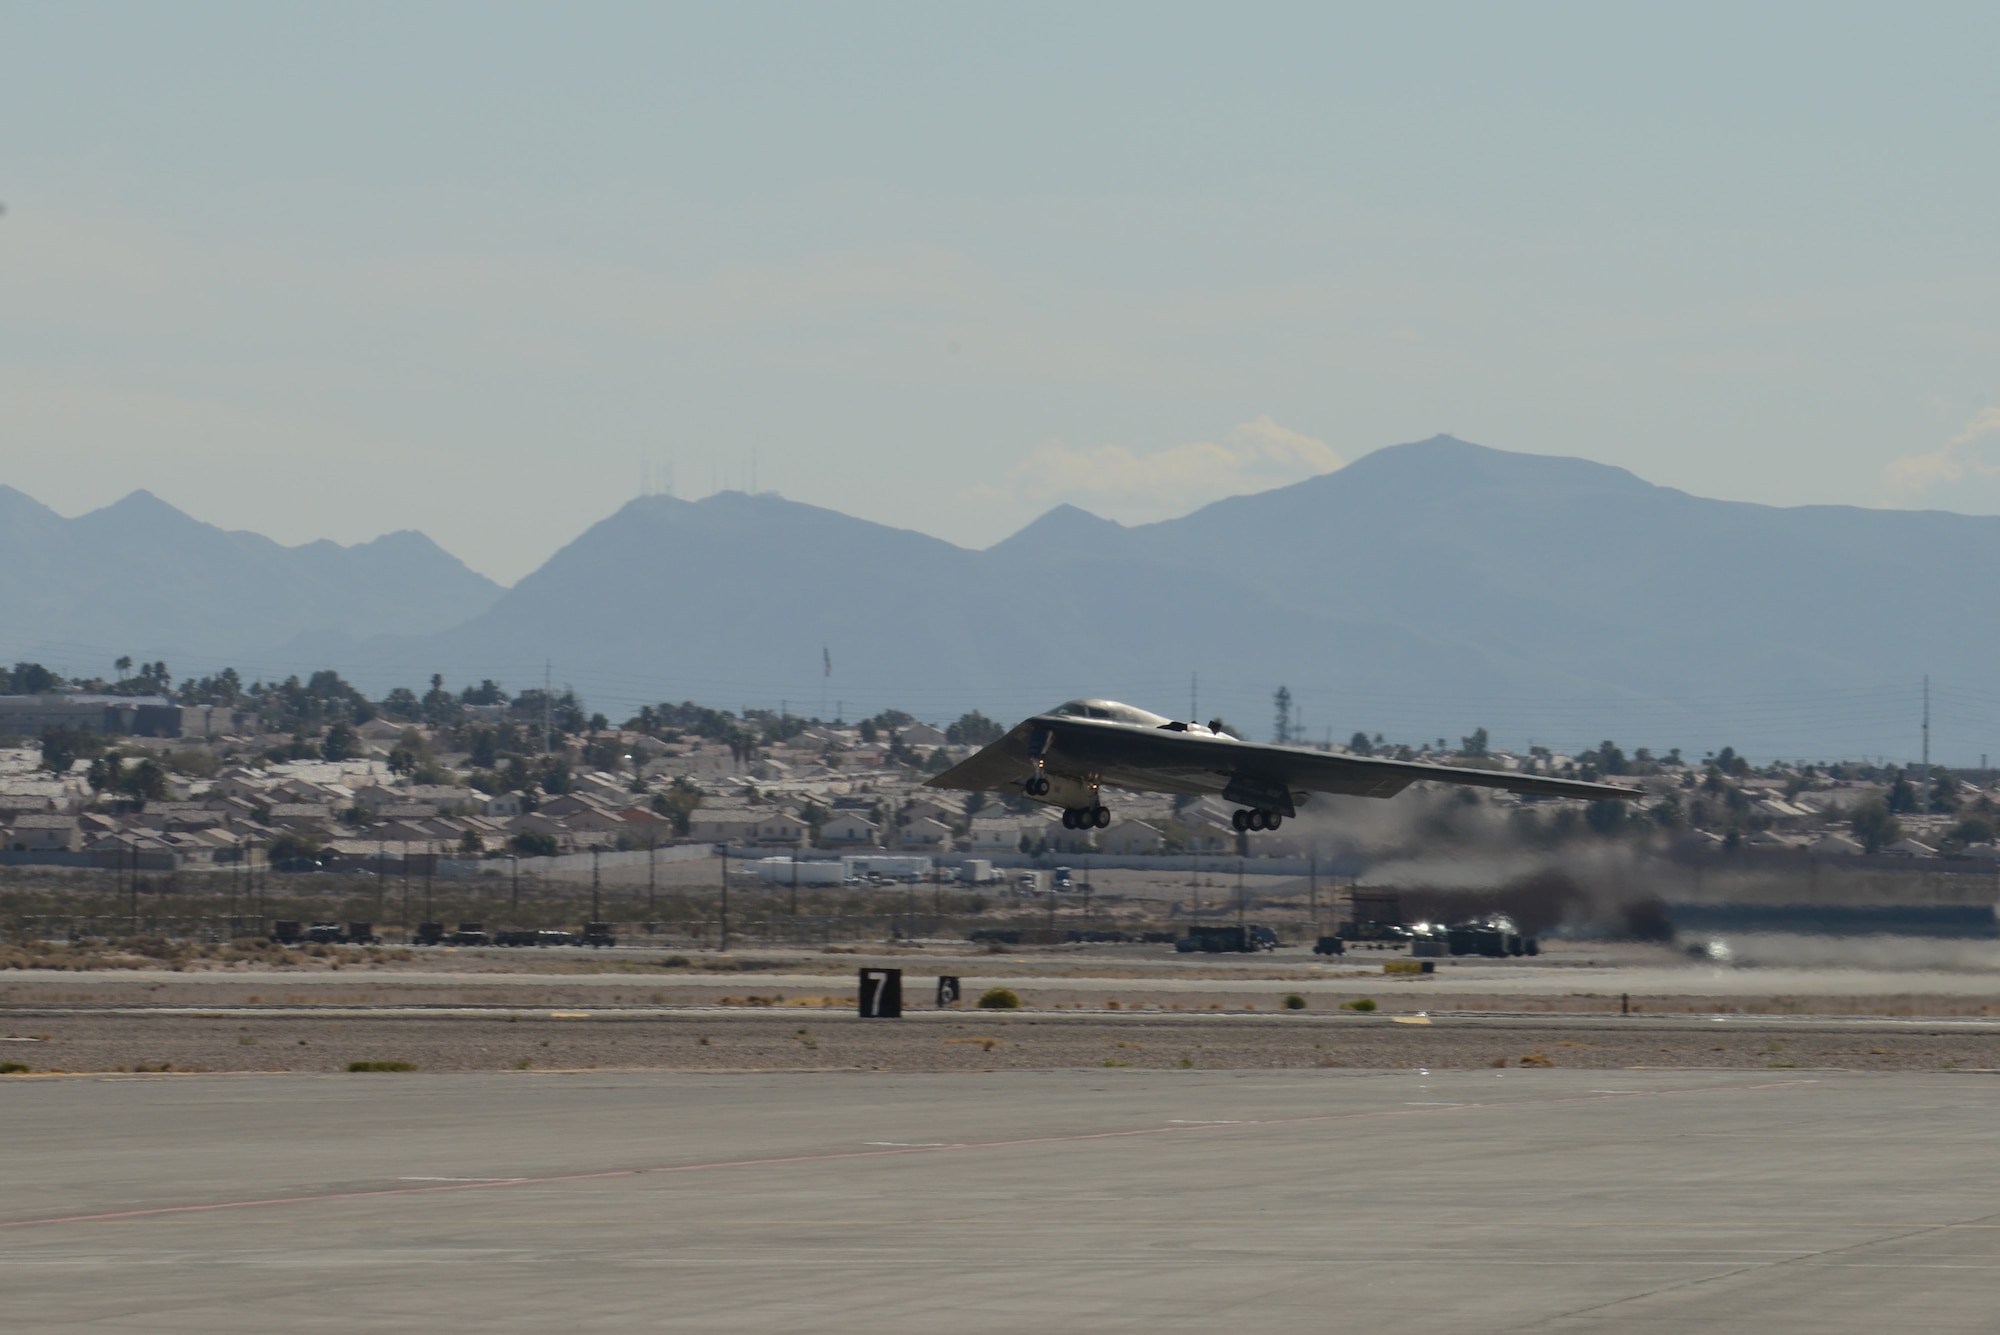 A B-2 Spirit from the 13th Bomb Squadron, Whiteman Air Force Base, Mo., takes off from the  runway at Nellis AFB, Nev., Feb. 4, 2014. The 13th BS is participating in the combat exercise Red Flag 14-1. The B-2 Spirit is a multi-role bomber capable of delivering both conventional and nuclear munitions. The U.S. Air Force’s premier exercise gives military members the opportunity to experience realistic, stressful combat situations in a controlled environment to increase their ability to complete missions and return home. (U.S. Air Force photo by Senior Airman Benjamin Sutton/Released)